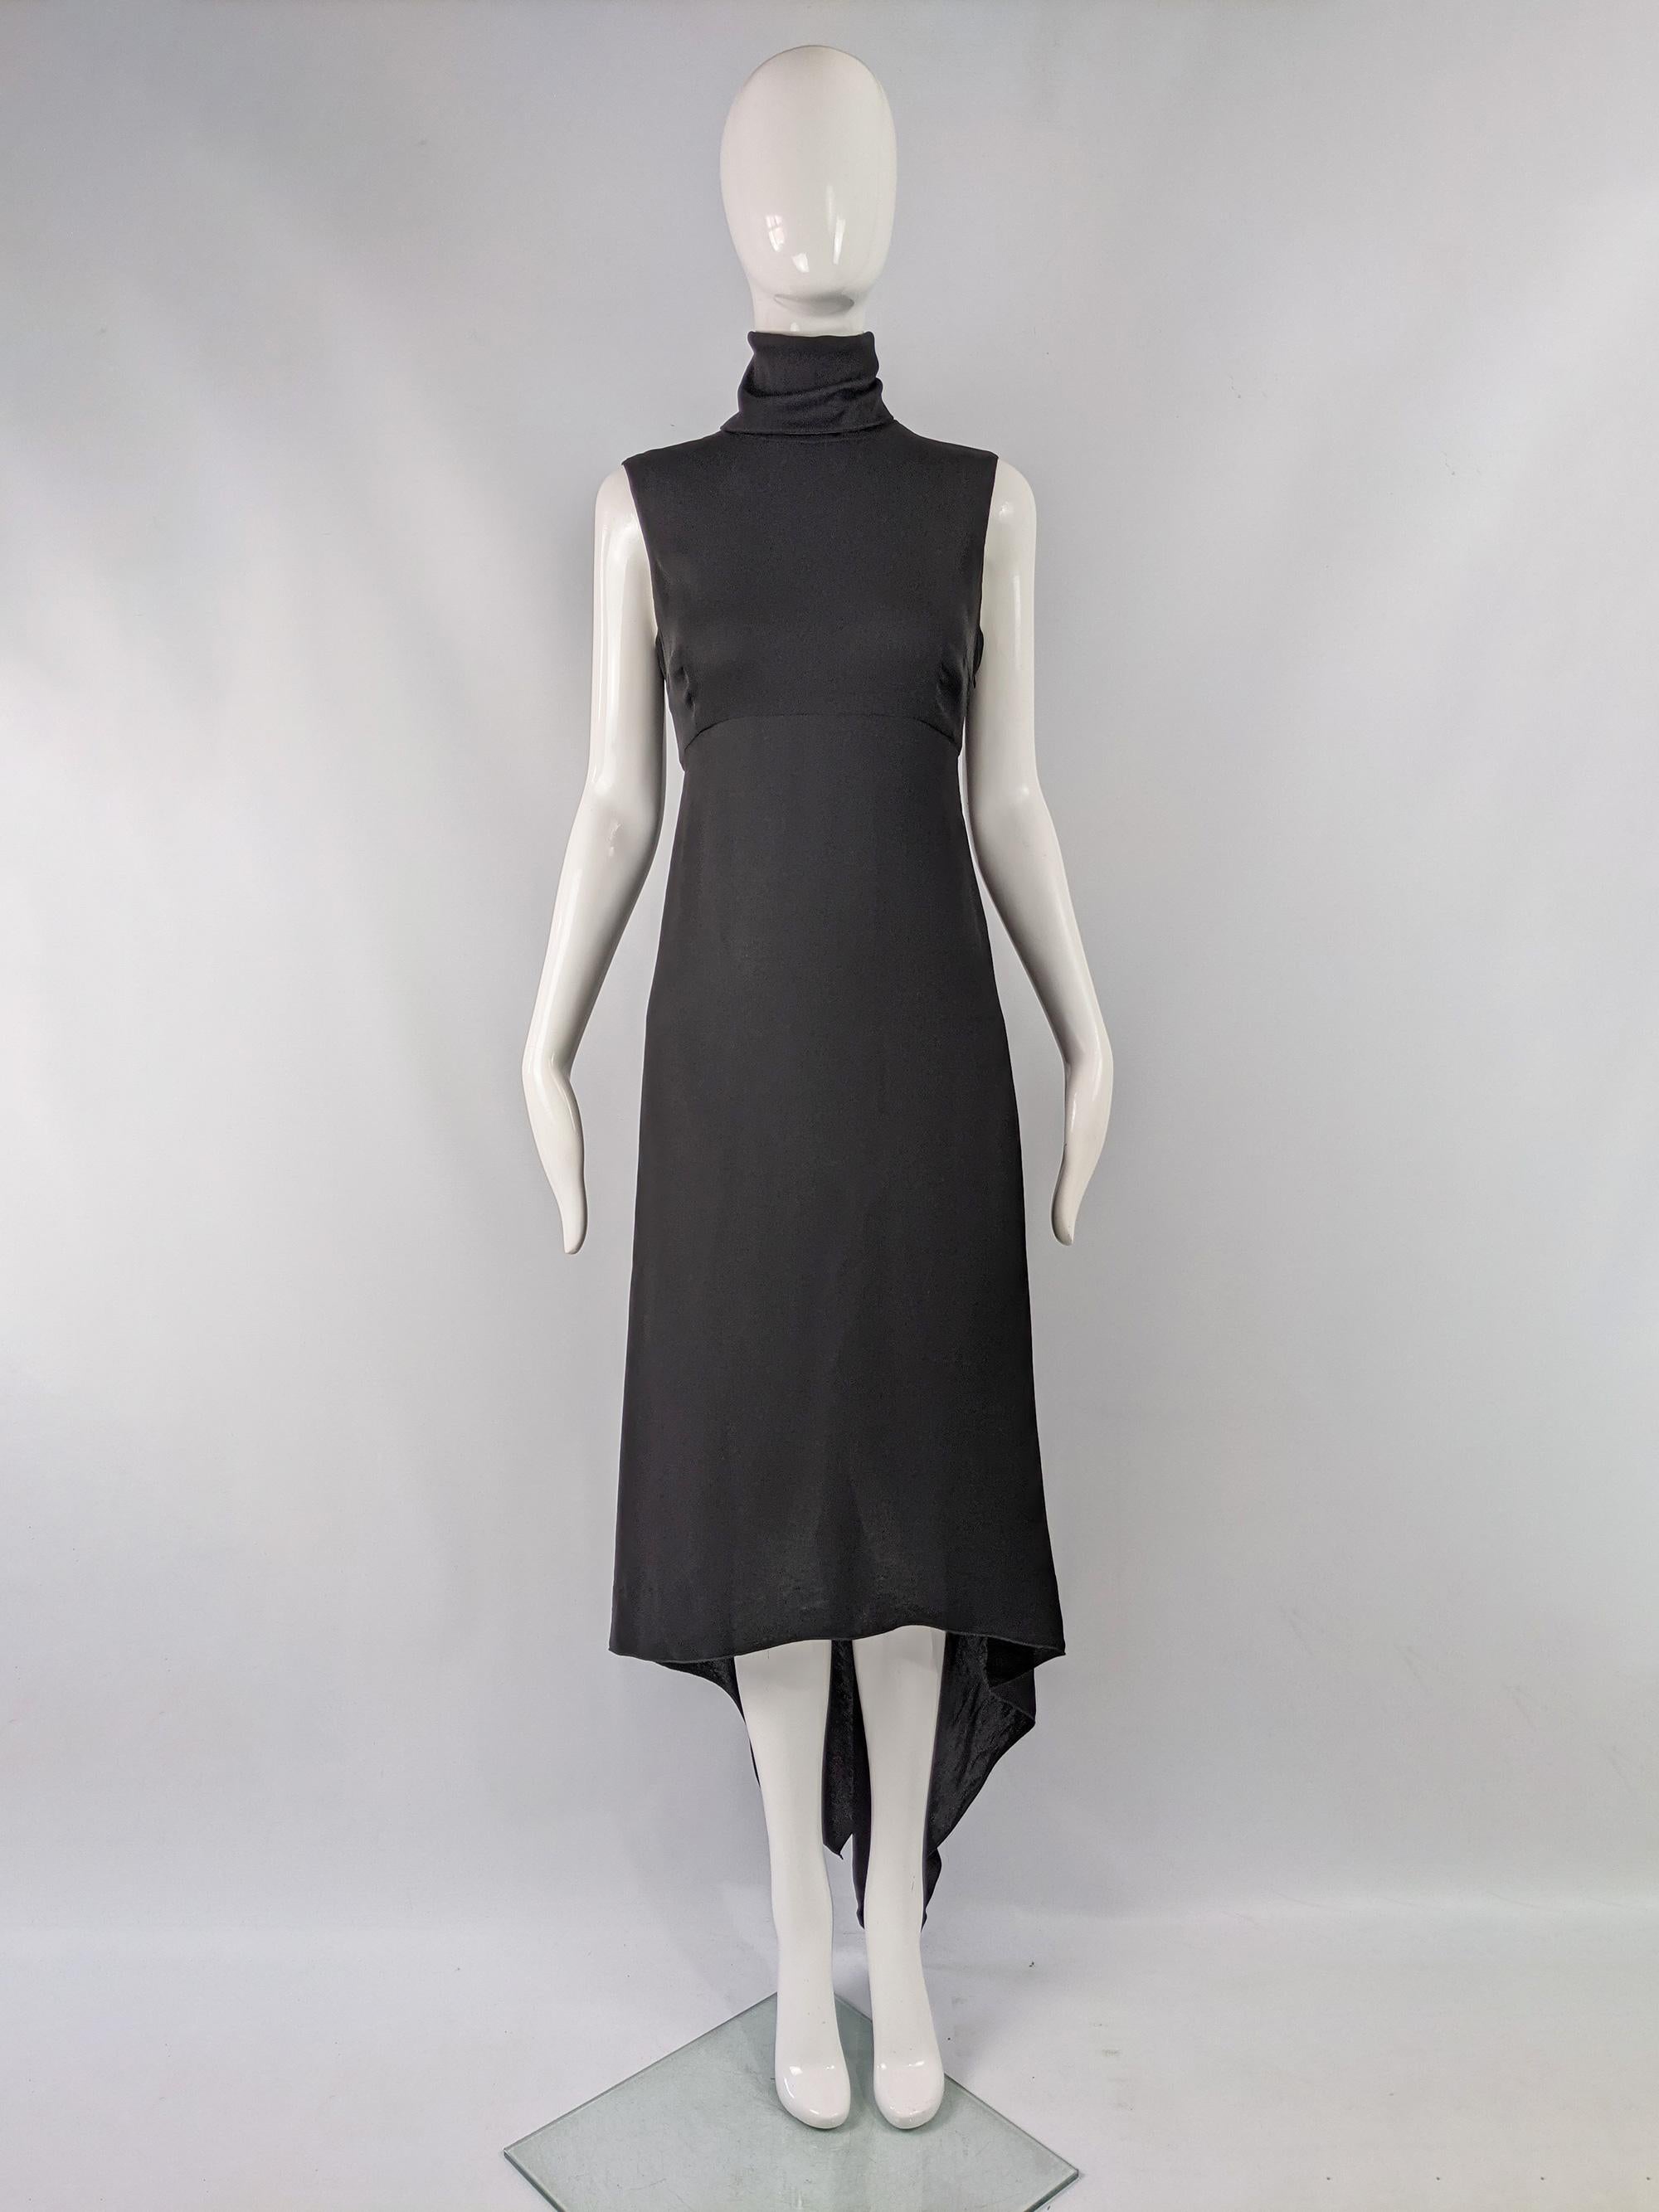 A fabulous vintage Gianfranco Ferré dress from the late 90s / early 2000s by luxury Italian fashion designer, Gianfranco Ferre. In a black silk blend chiffon with a layered and draped asymmetrical skirt, a high neck and sleeveless design. 

Size: